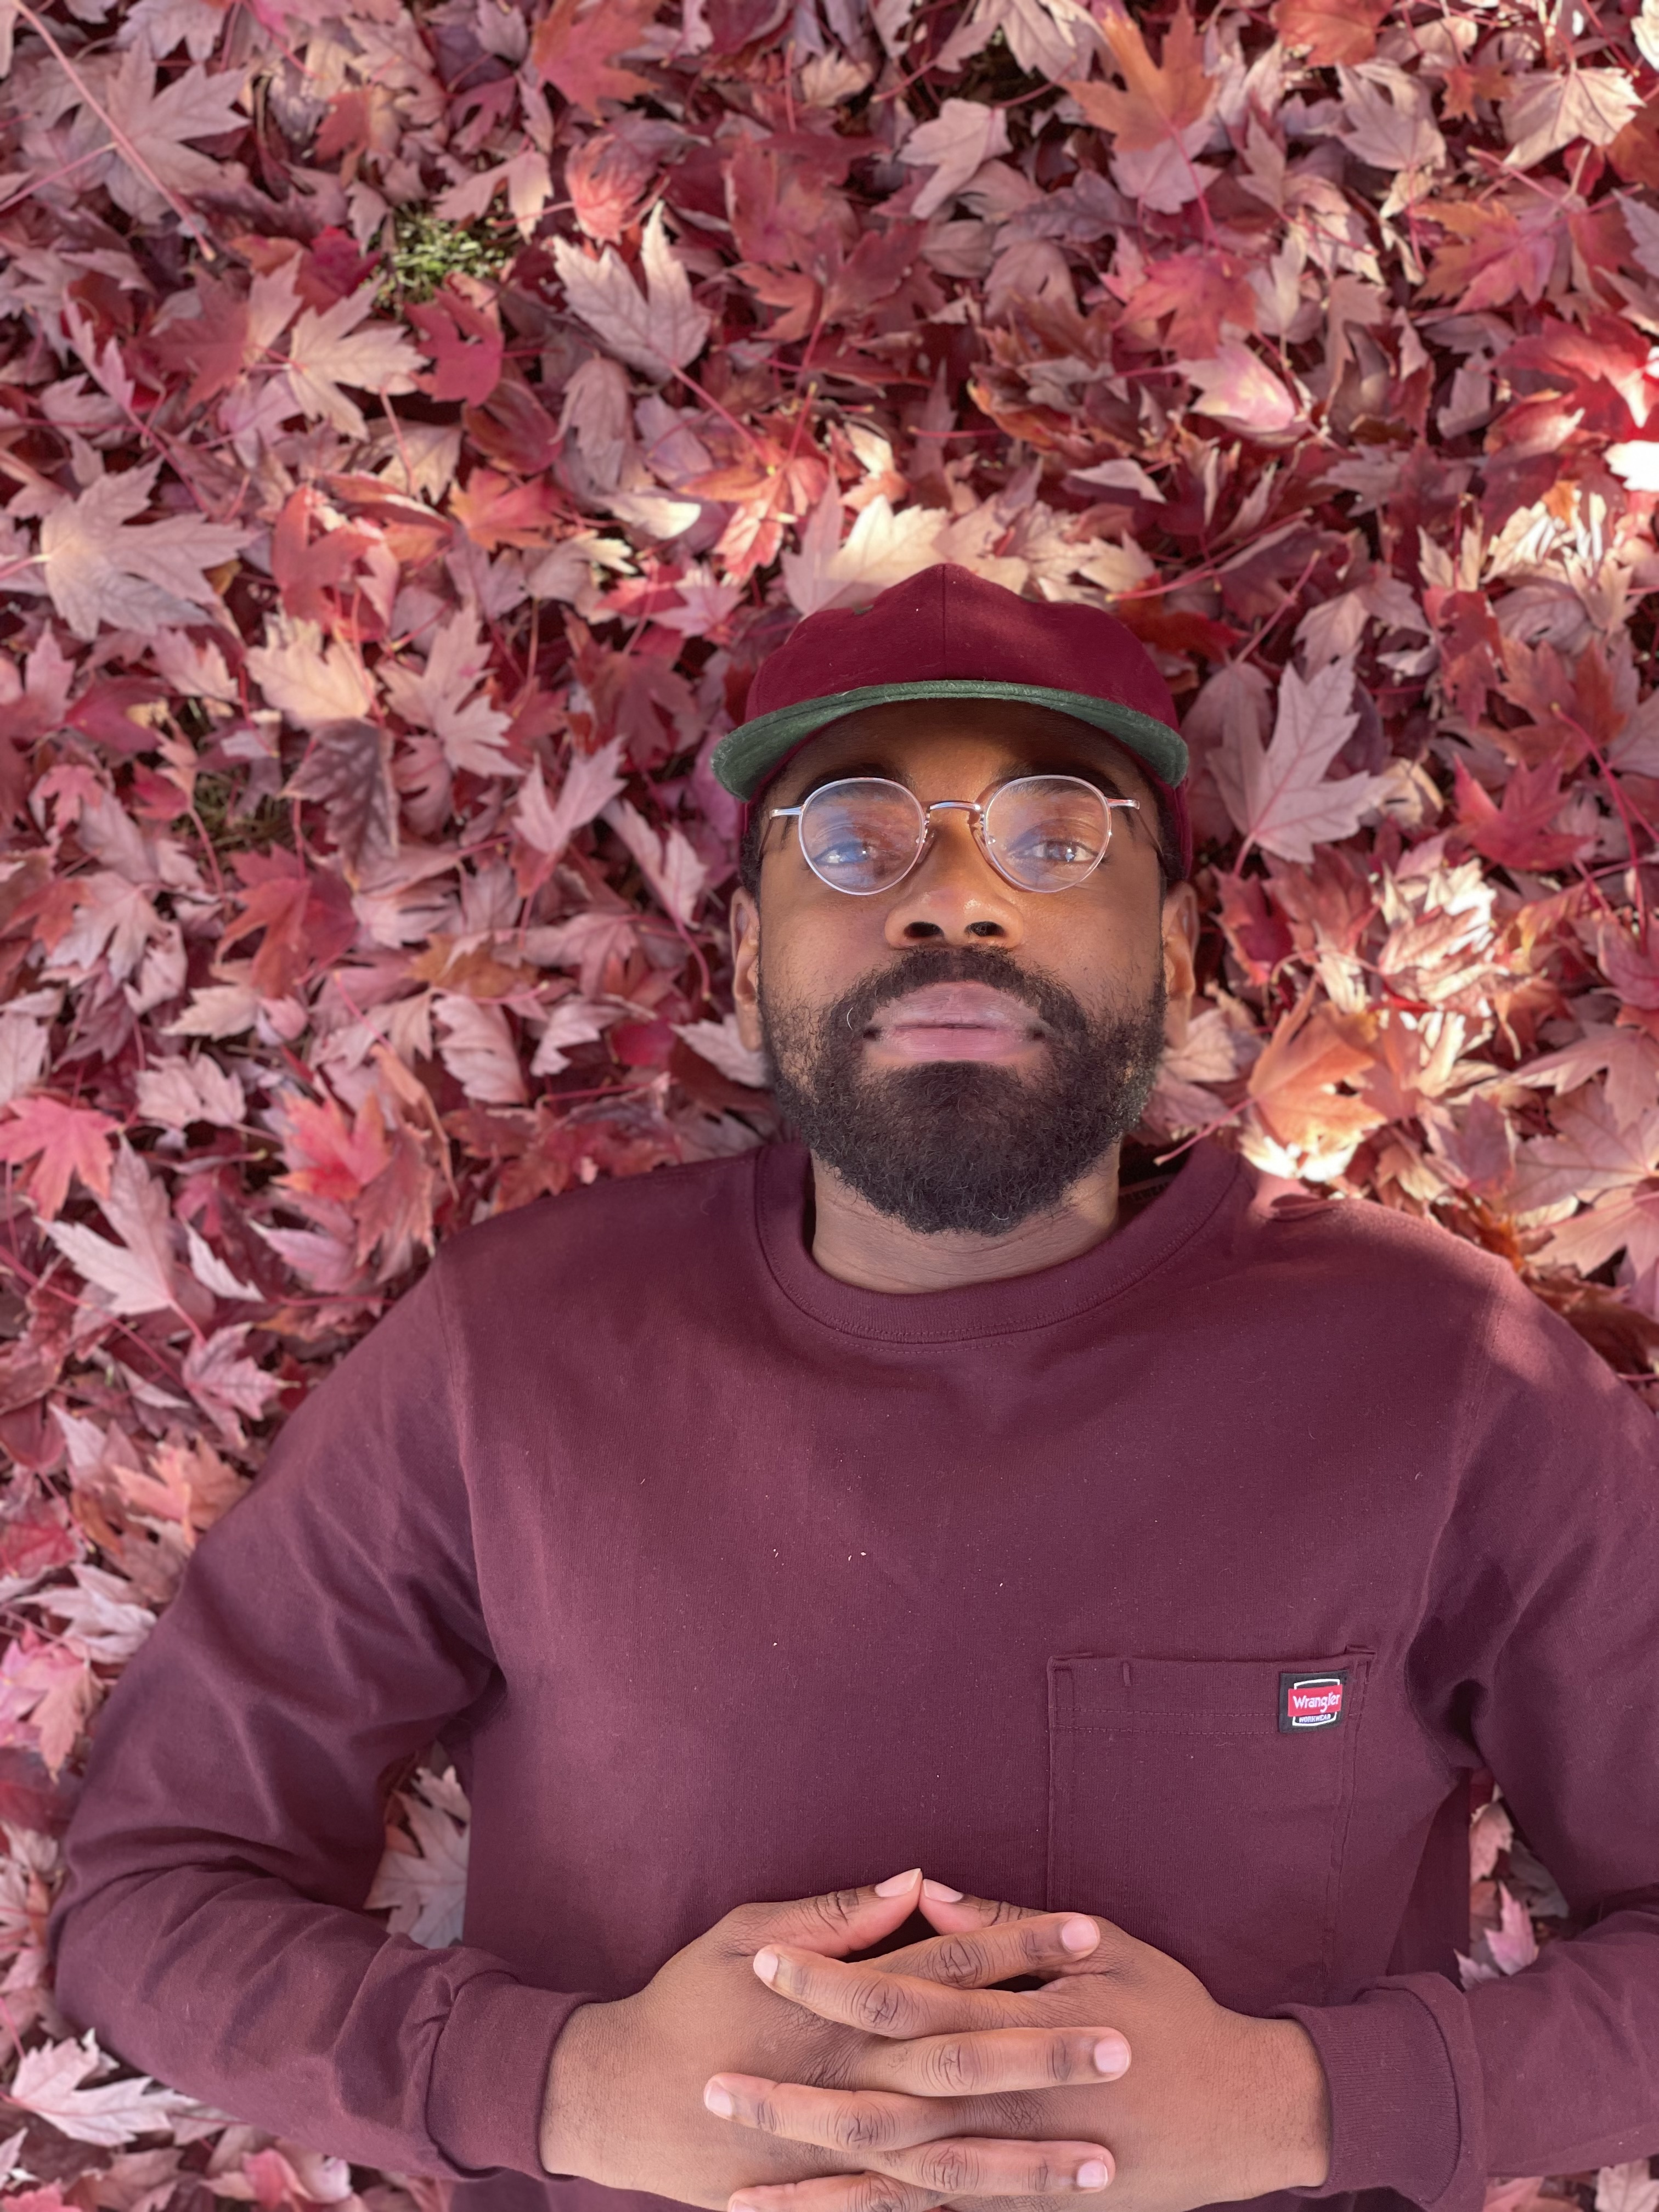 Hip Hop Artist, Schama Noel headshot. Wearing a maroon sweater laying in fall colored leaves